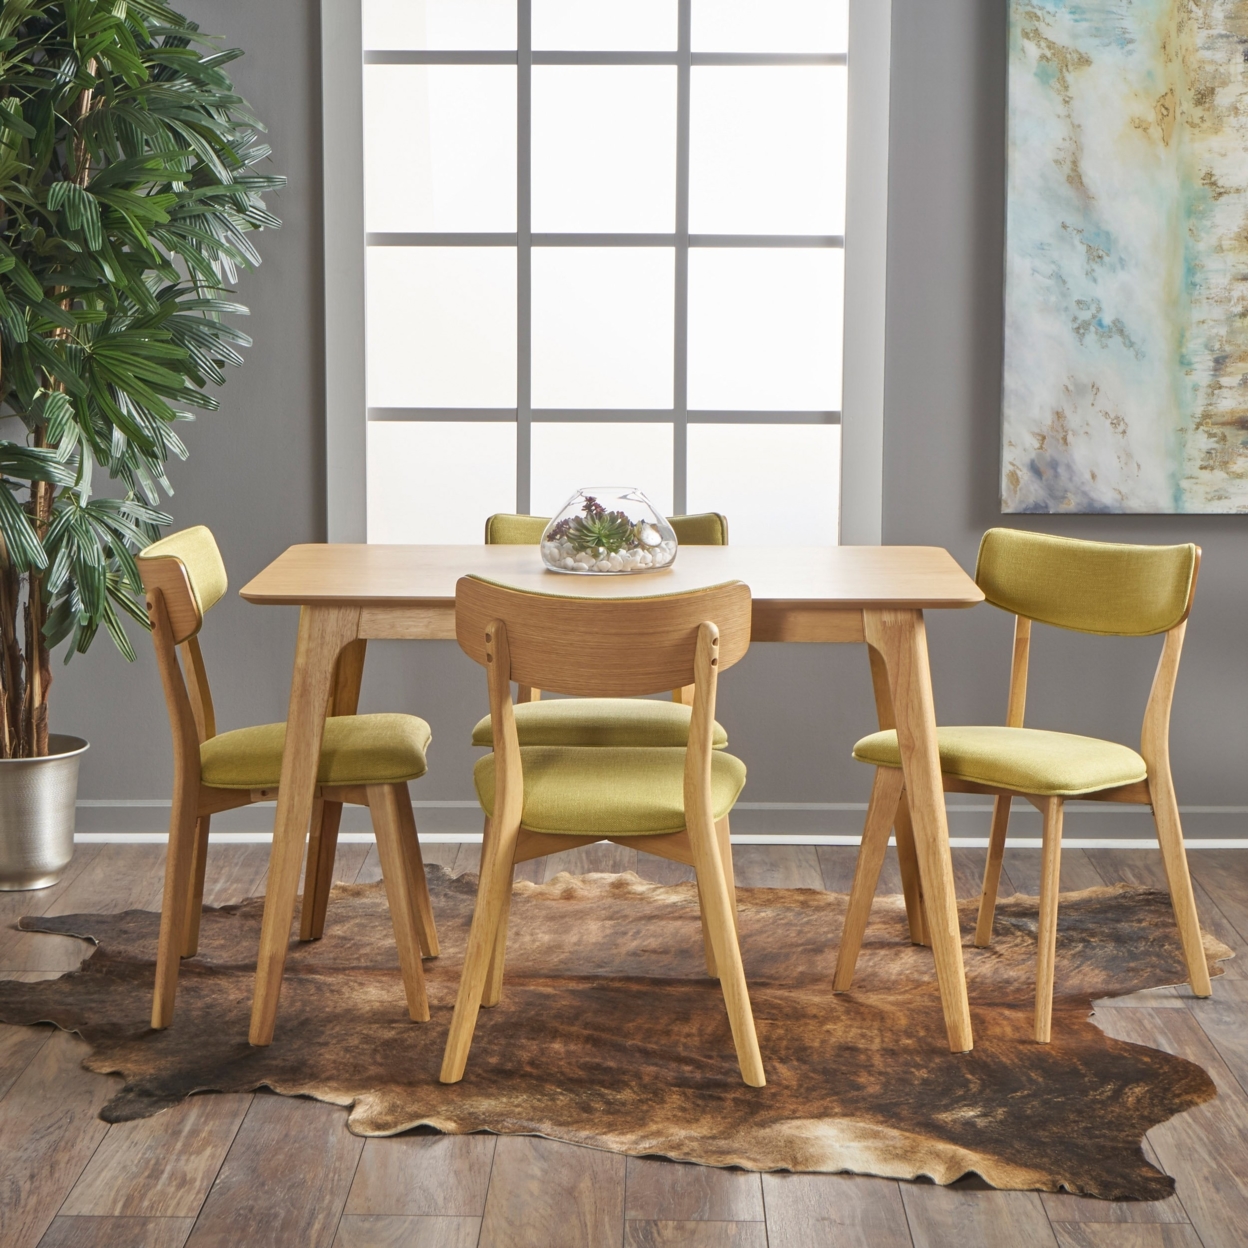 Meanda Mid Century Finished 5 Piece Wood Dining Set With Fabric Chairs - Light Beige